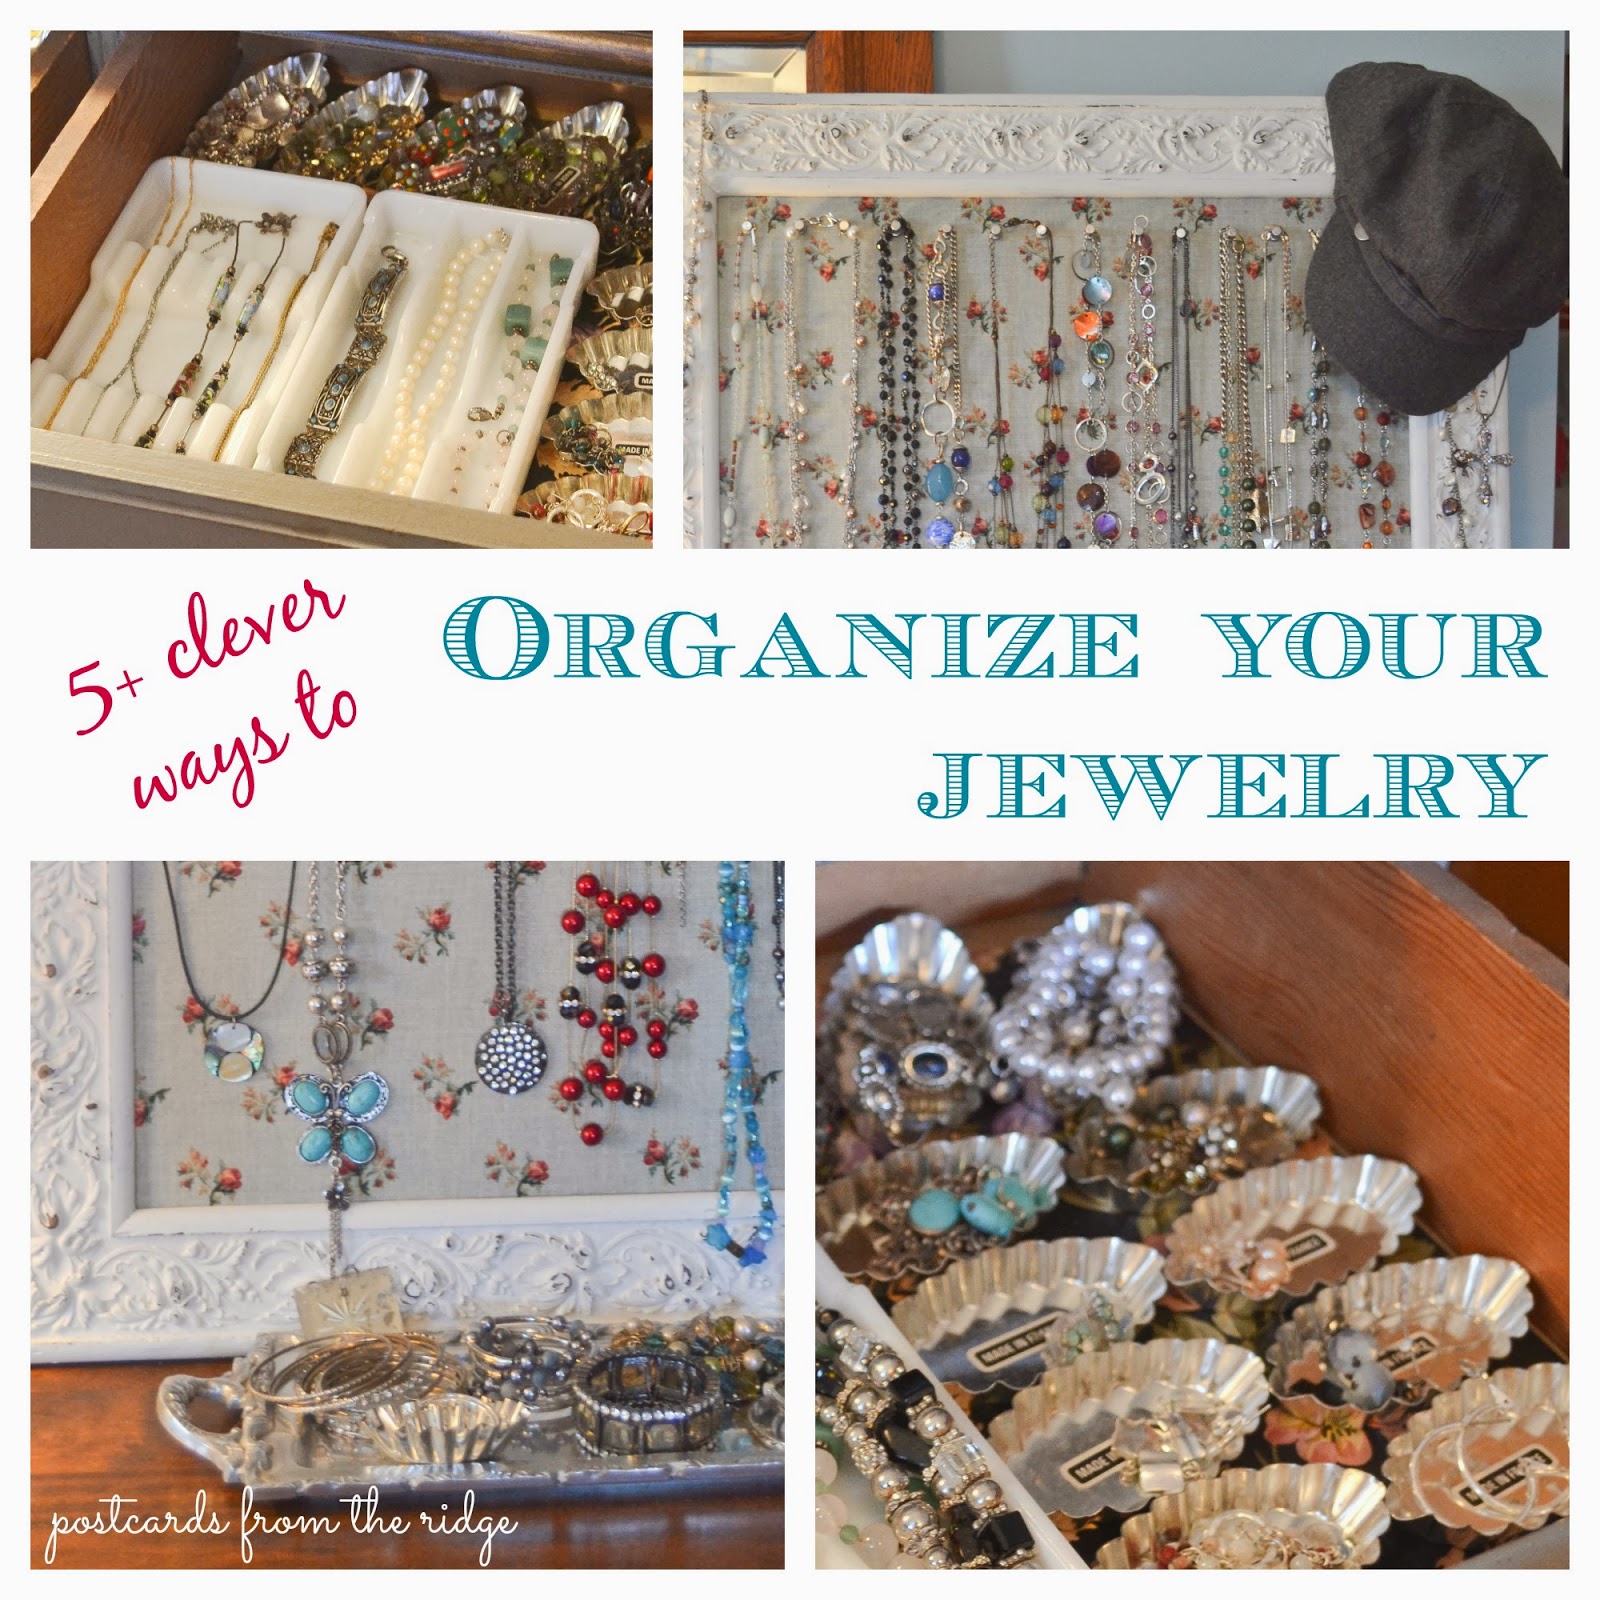 How clever!  Different vintage items repurposed for jewelry organization.  Love it.